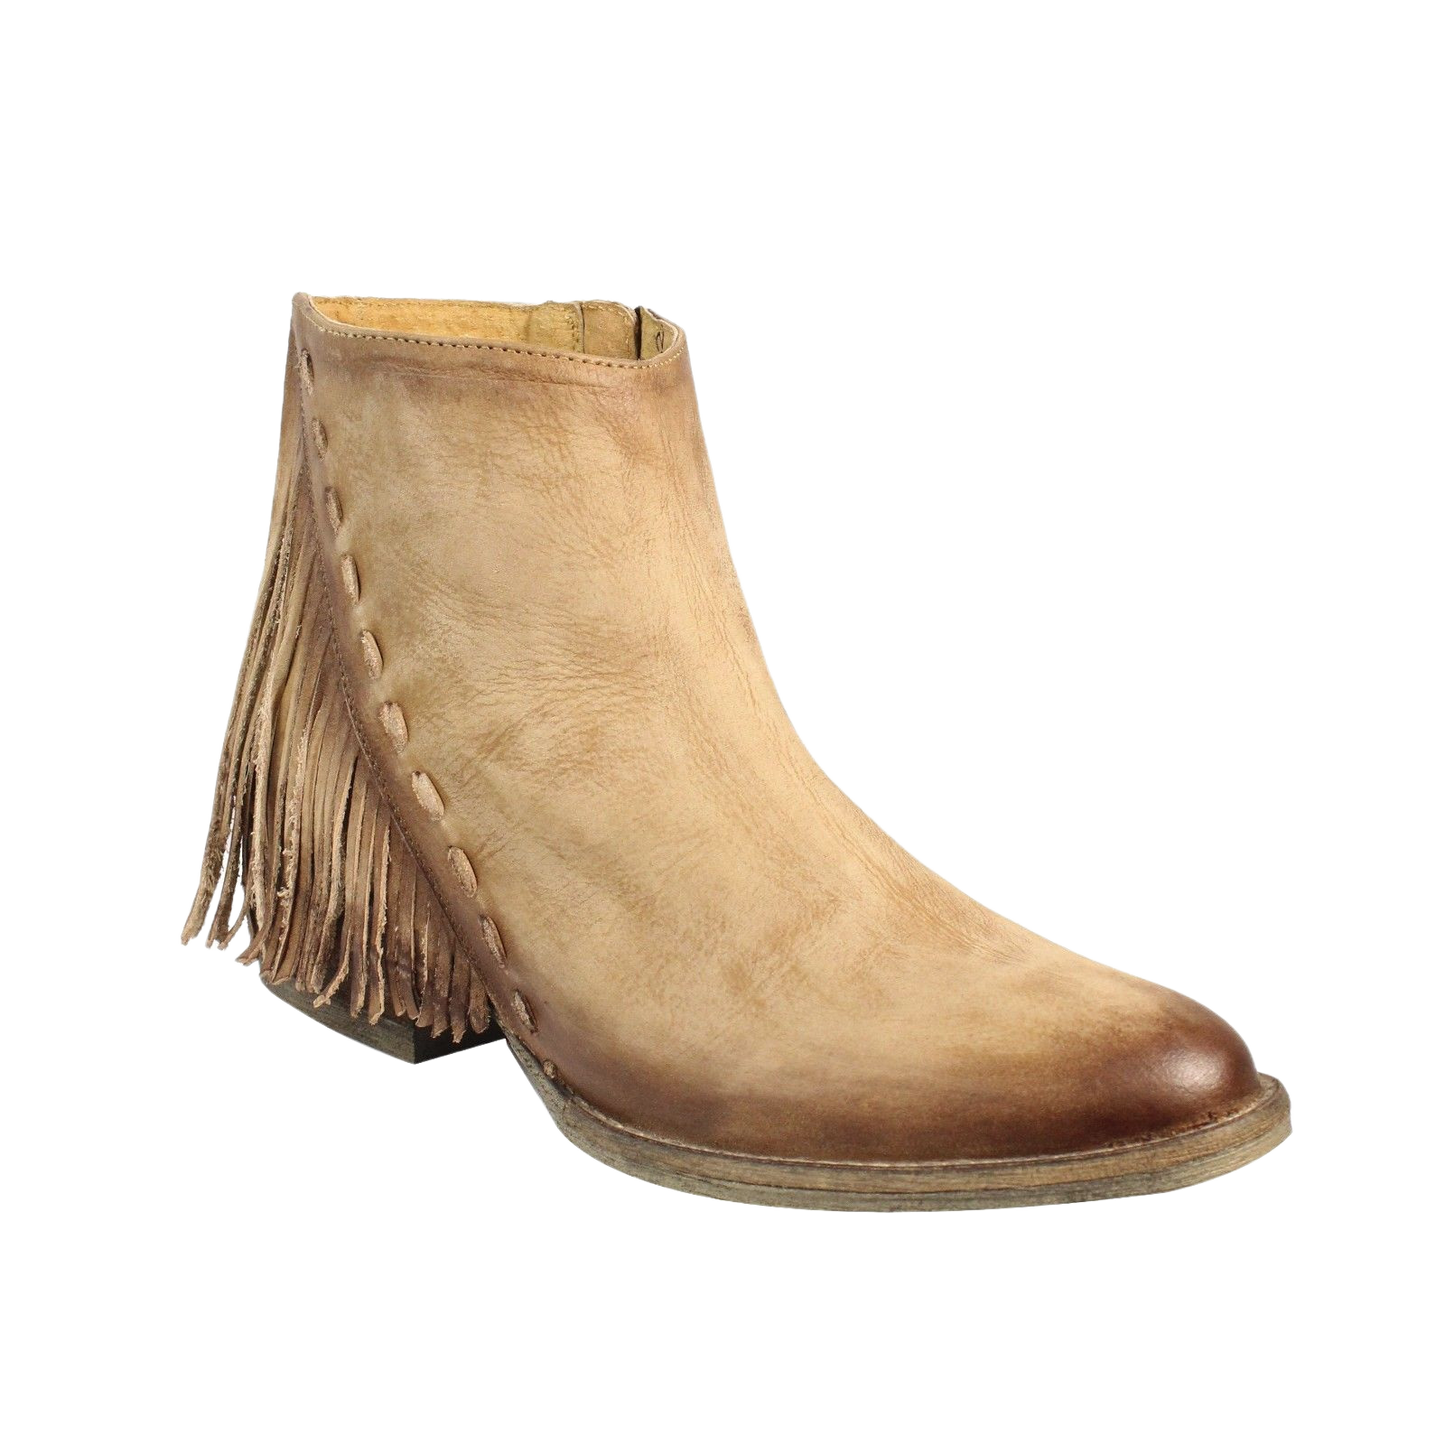 Circle G by Corral Ladies Tan Side Fringe Bootie Q0035